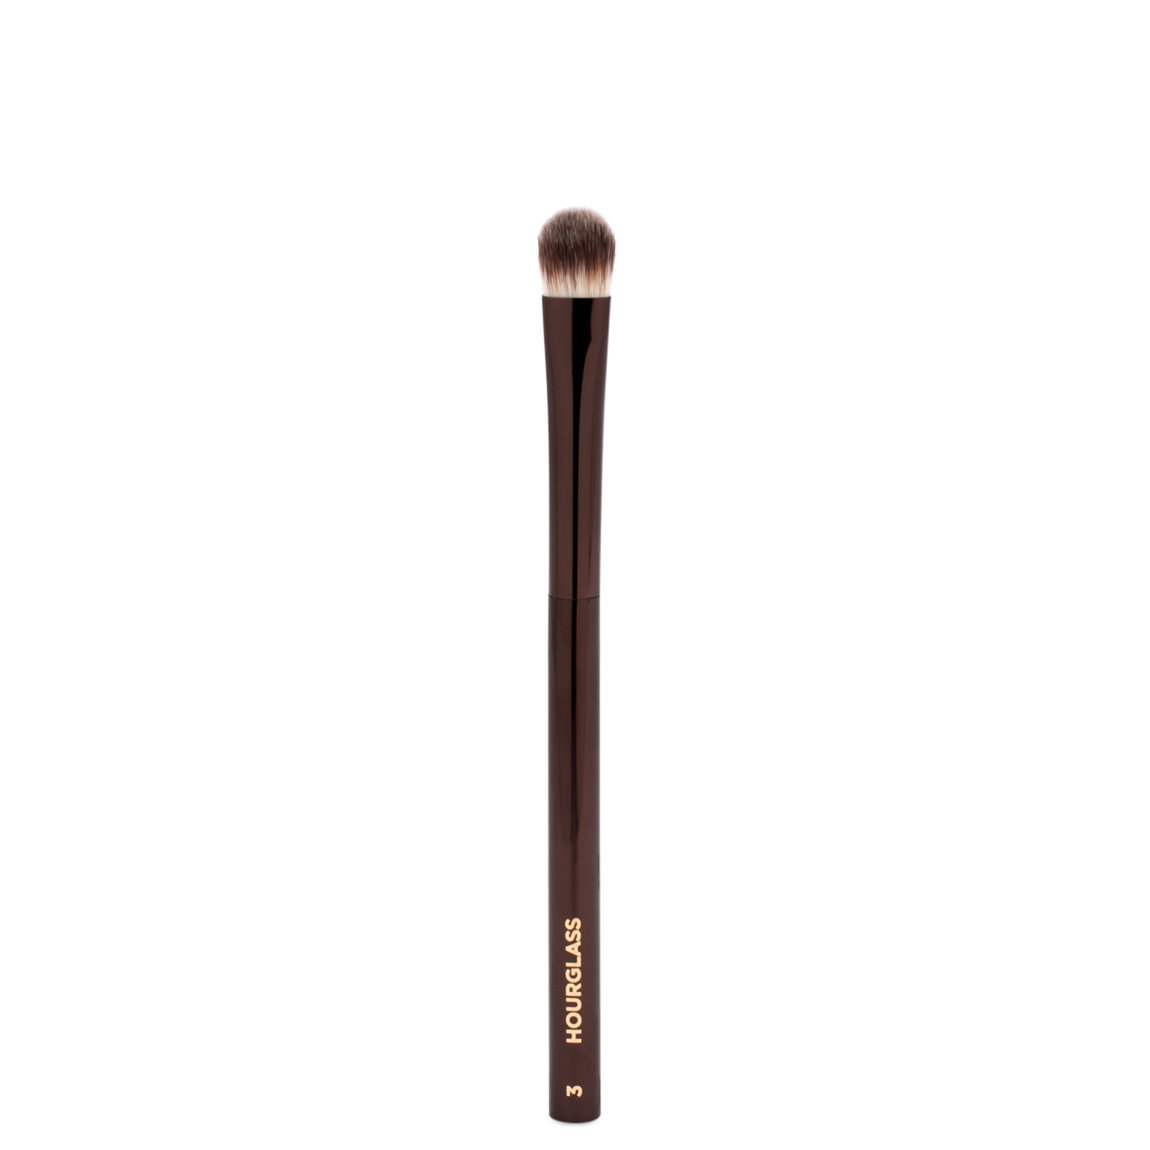 Hourglass N° 3 All Over Shadow Brush alternative view 1 - product swatch.